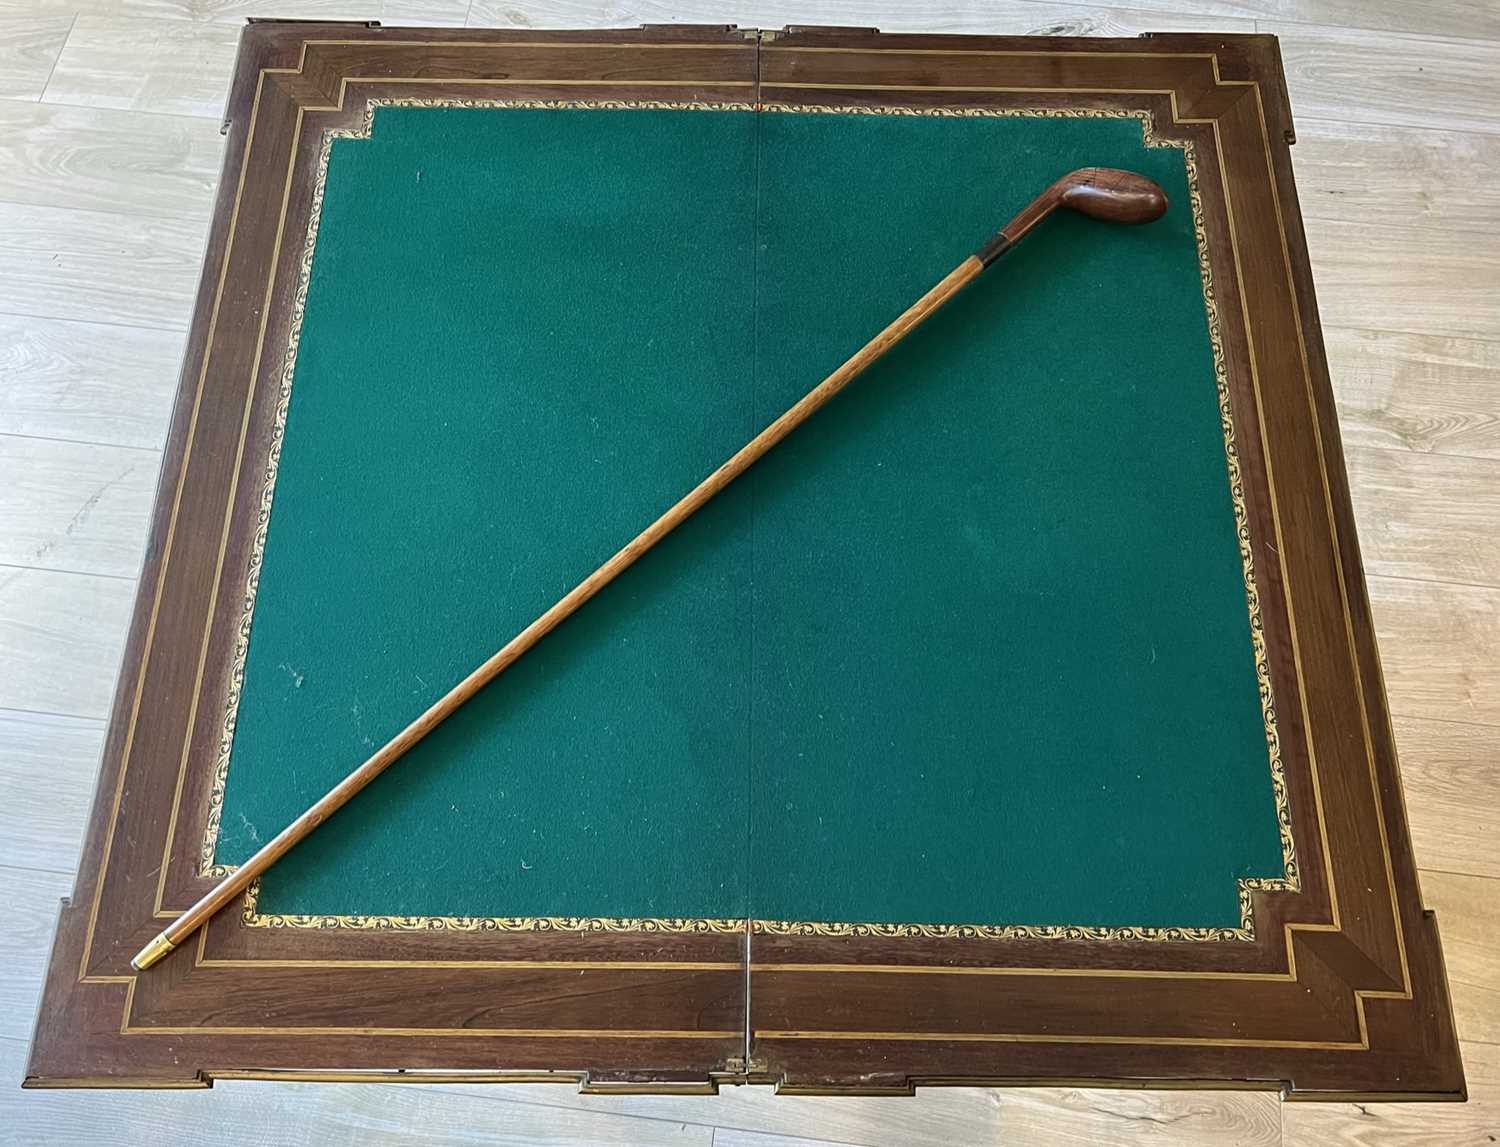 GOLFING INTEREST: A LATE 19TH / EARLY 20TH CENTURY WALKING CANE IN THE FORM OF A GOLF CLUB - Image 2 of 3